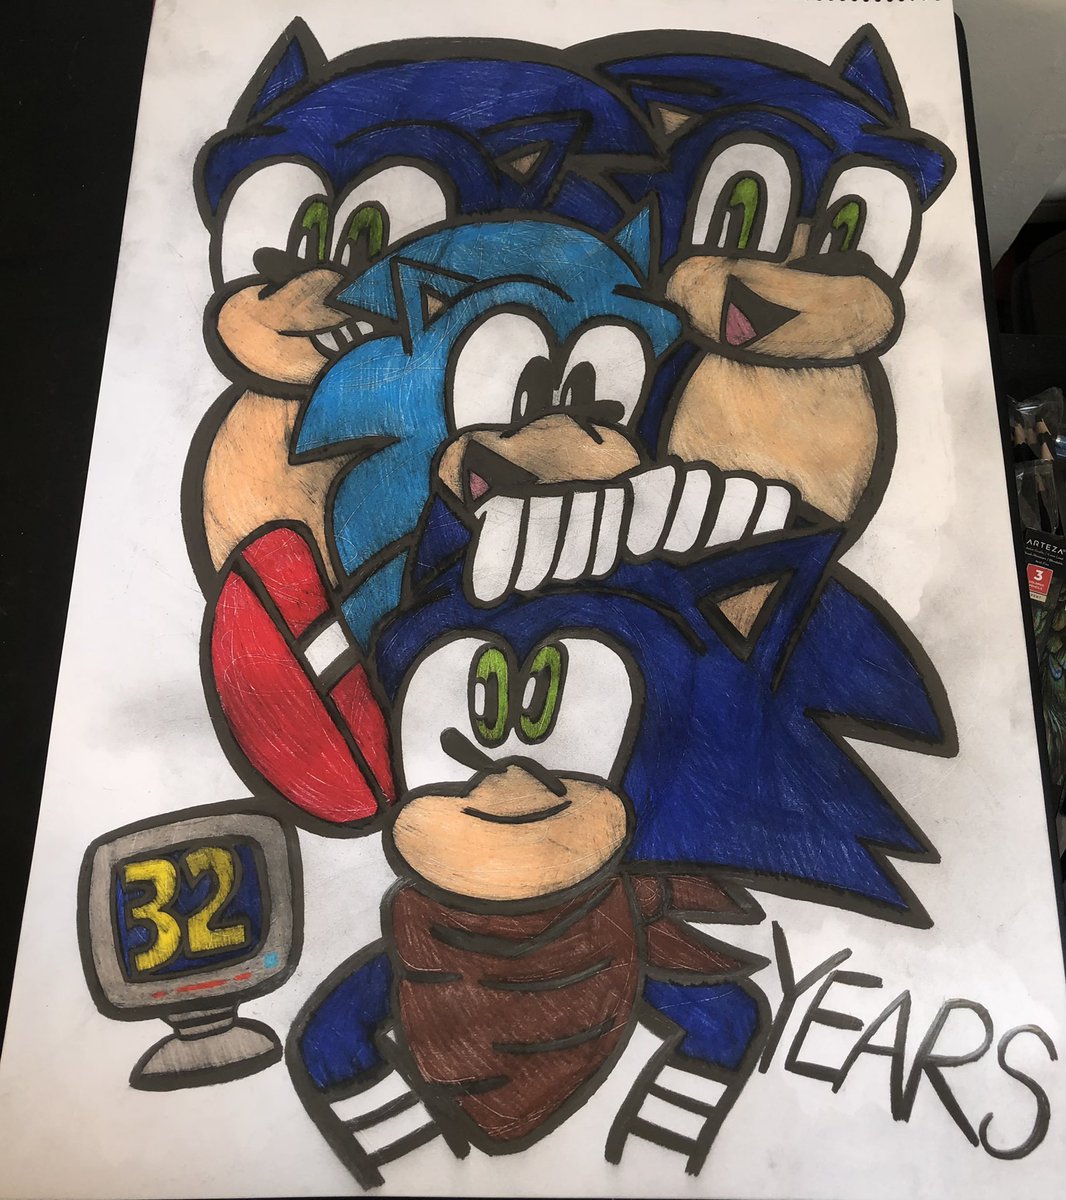 Happy 32nd Anniversary to the one and only, Sonic The Hedgehog!!! 

#SonicTheHedgehog #sonicfanart #sonicart #sonicartist #Sonic #ClassicSonic #BoomSonic #MovieSonic #Sonic32nd